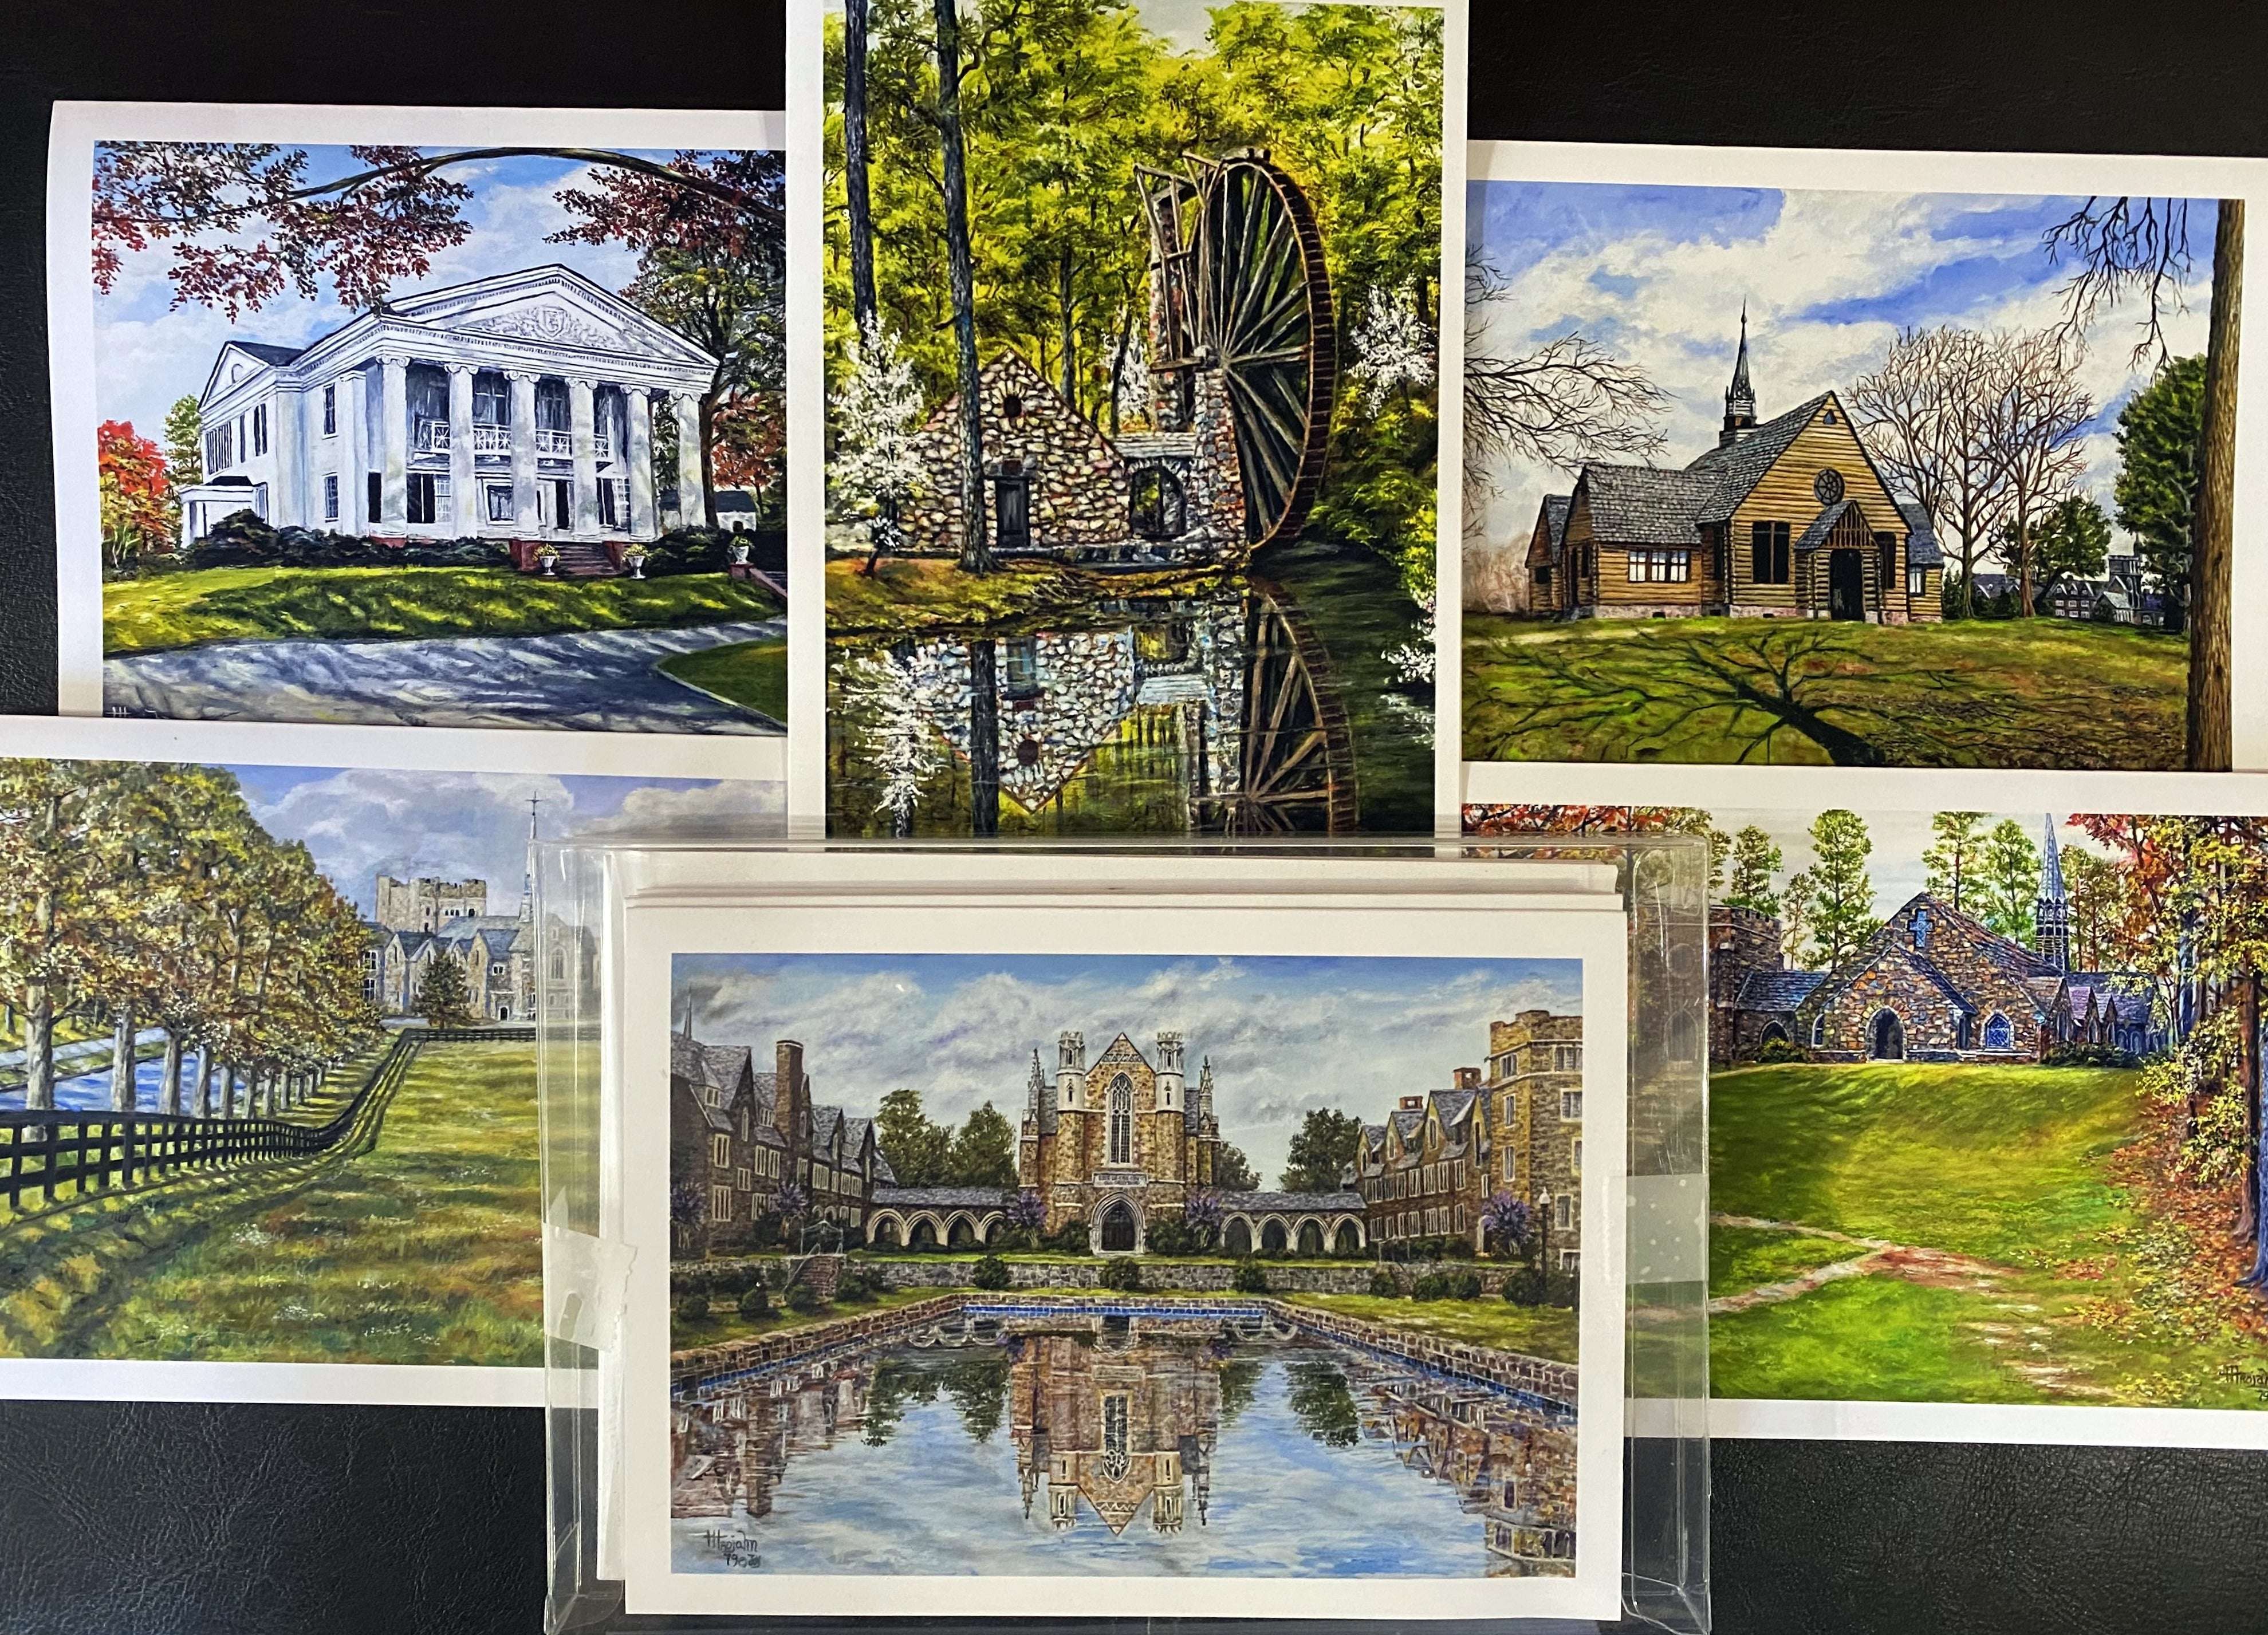 Berry College 5 x 7 Frameable Greeting Cards, set of 6